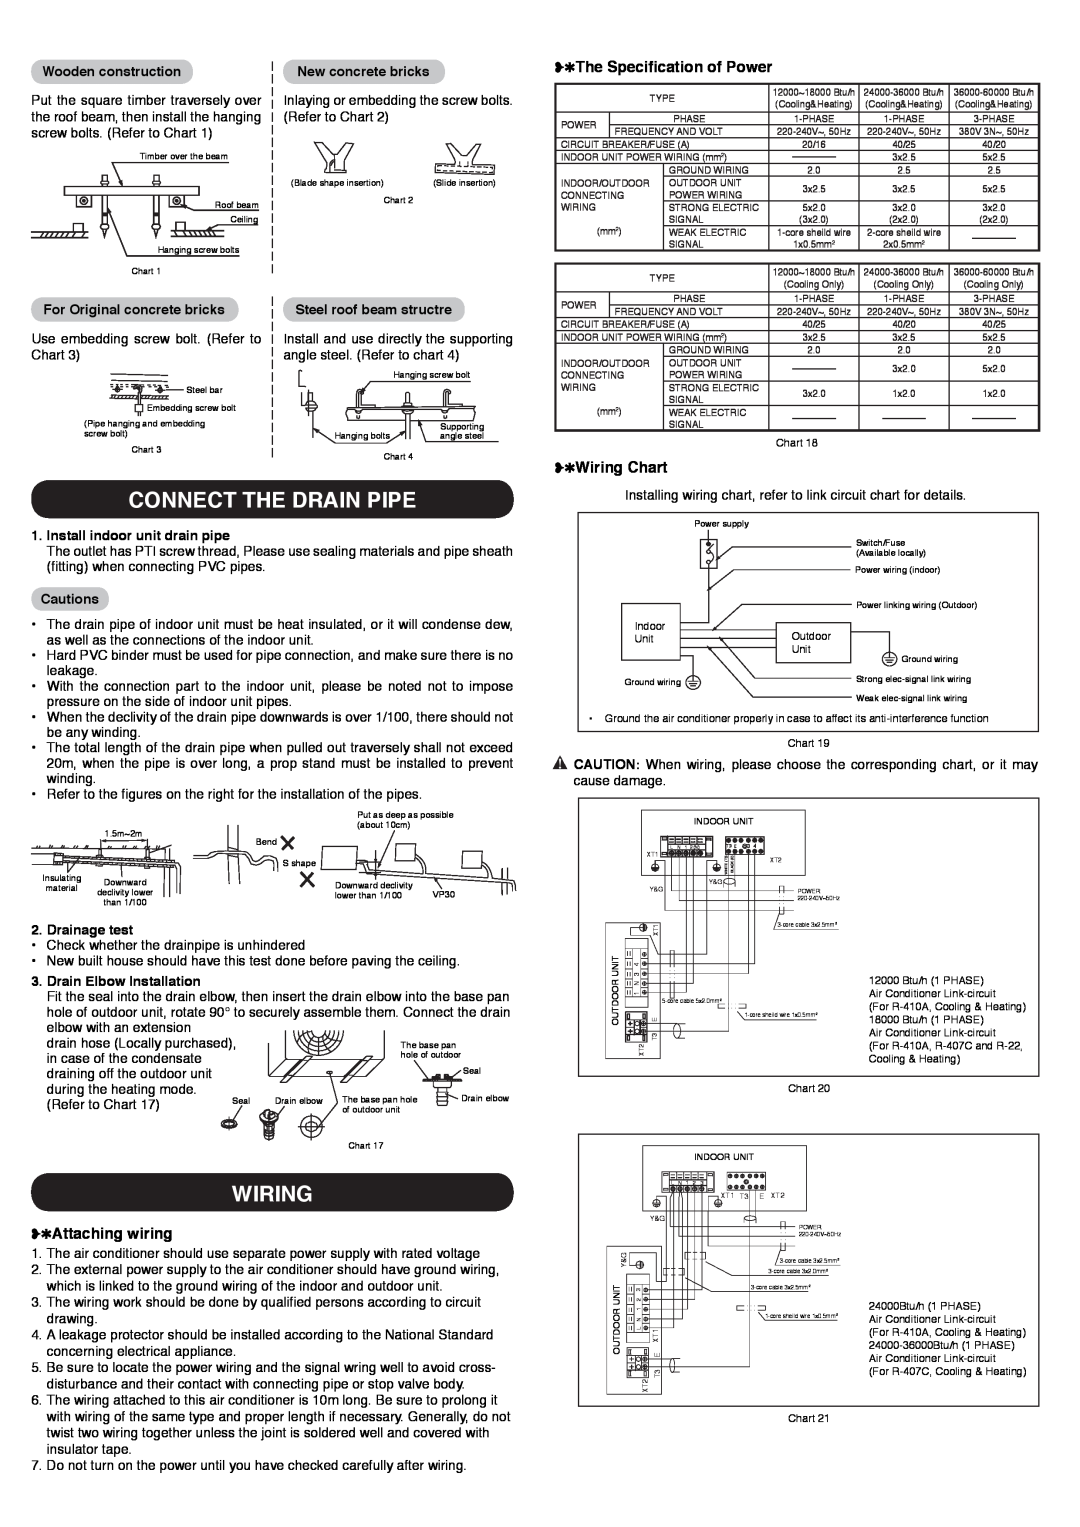 York YOCC-YOHC 12-60 owner manual Connect The Drain Pipe, The Speciﬁcation of Power, Wiring Chart, Attaching wiring 